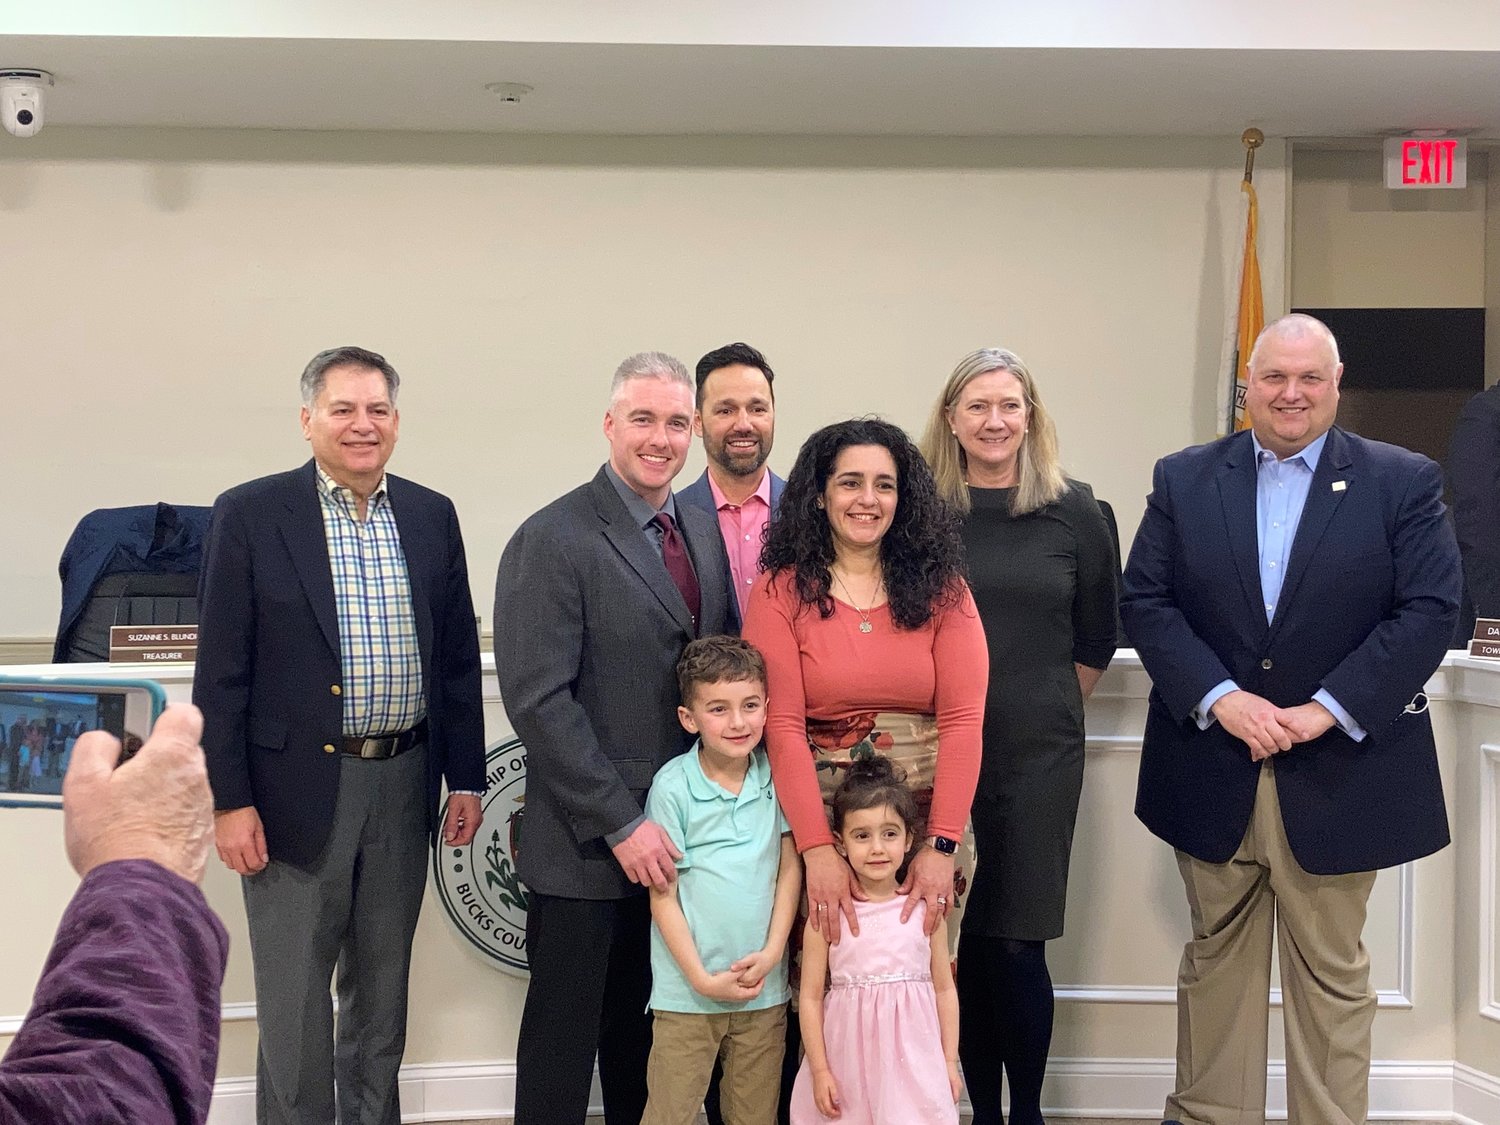 Lower Makefield Township’s new Fire Services Director Tim Chamberlain, second from left, stands with his wife, Michelle, and their two young children Andrew and Audrey at the March 16 supervisors meeting. In the back row, from left, are Supervisors Fredric Weiss, James McCartney, Suzanne Blundi and John Lewis.